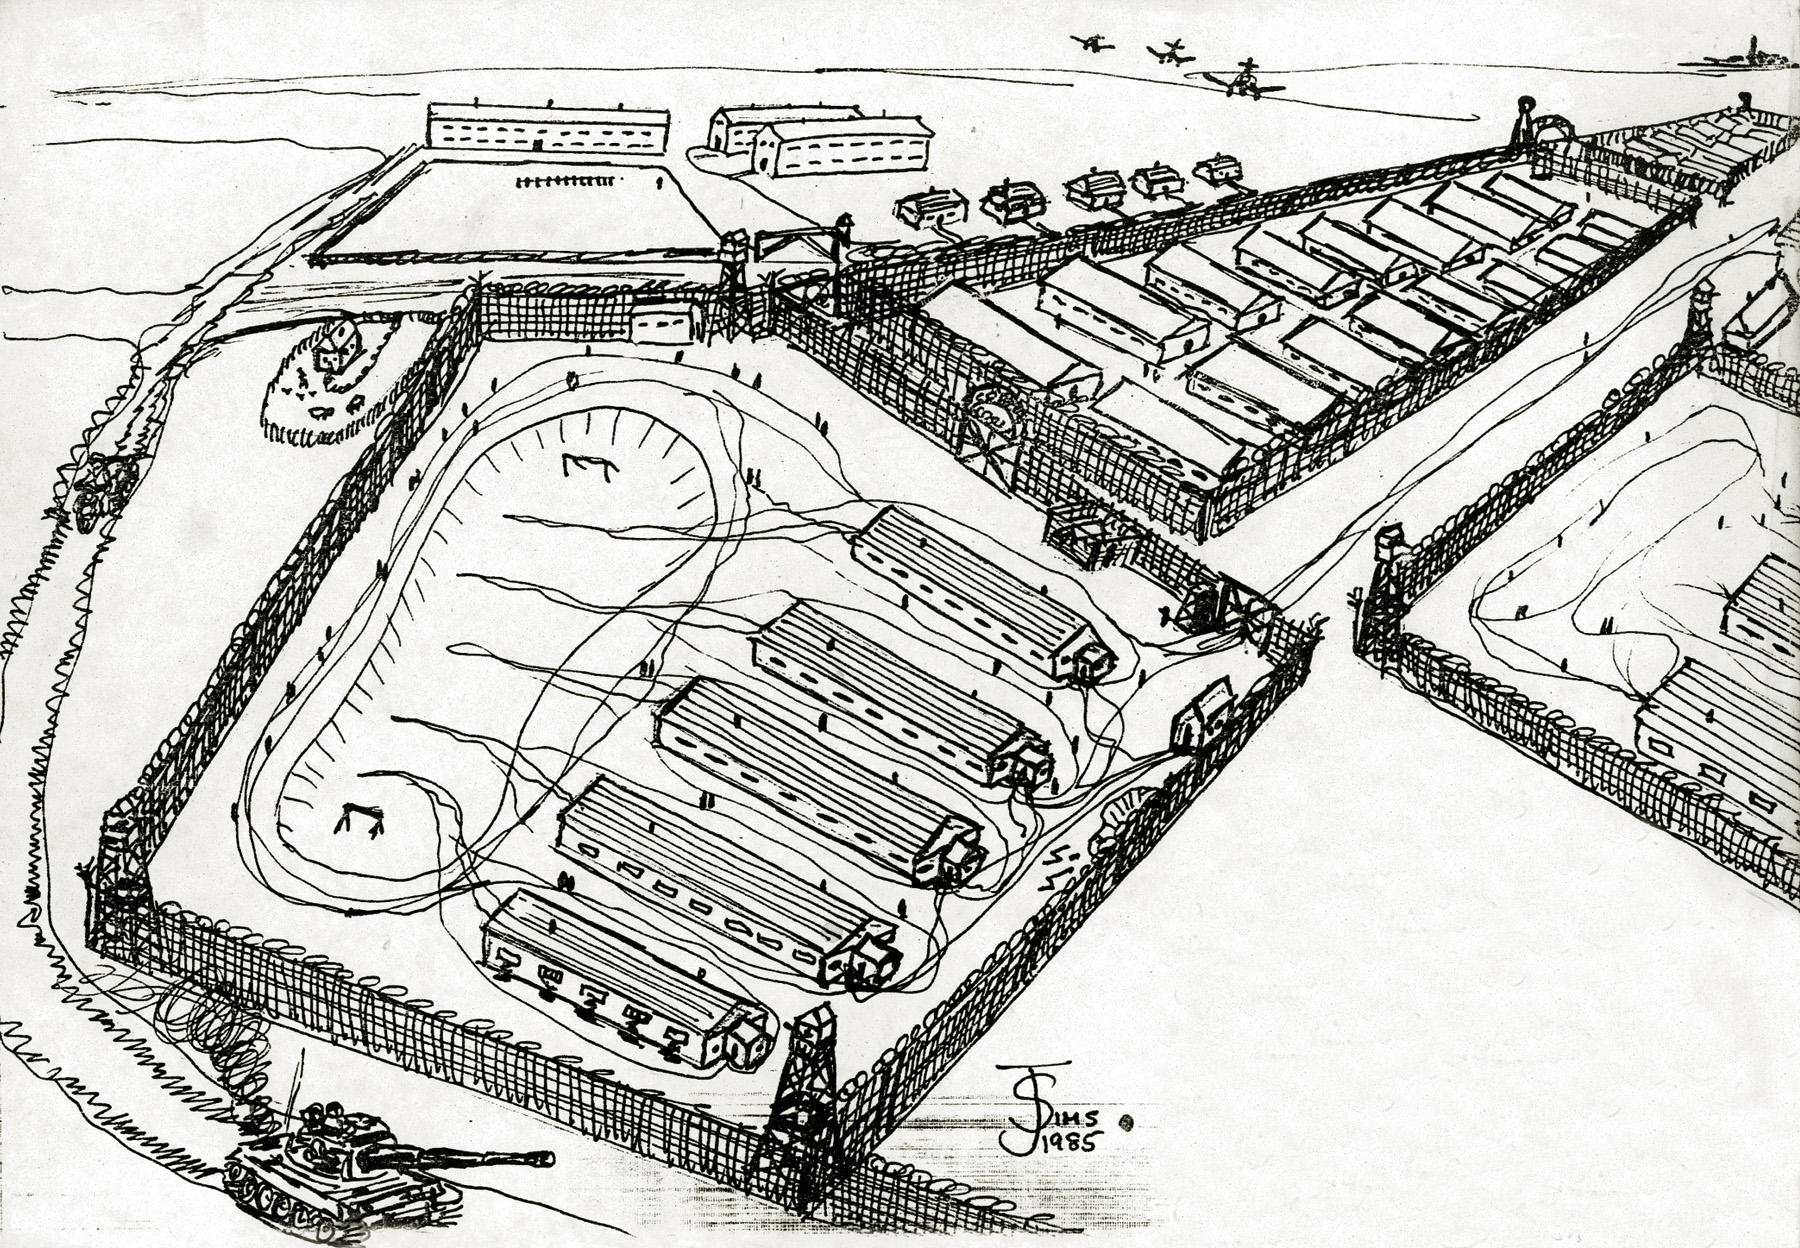 Sims made this sketch of the prison camp where he was held through the fall, winter, and spring of 1944-1945.